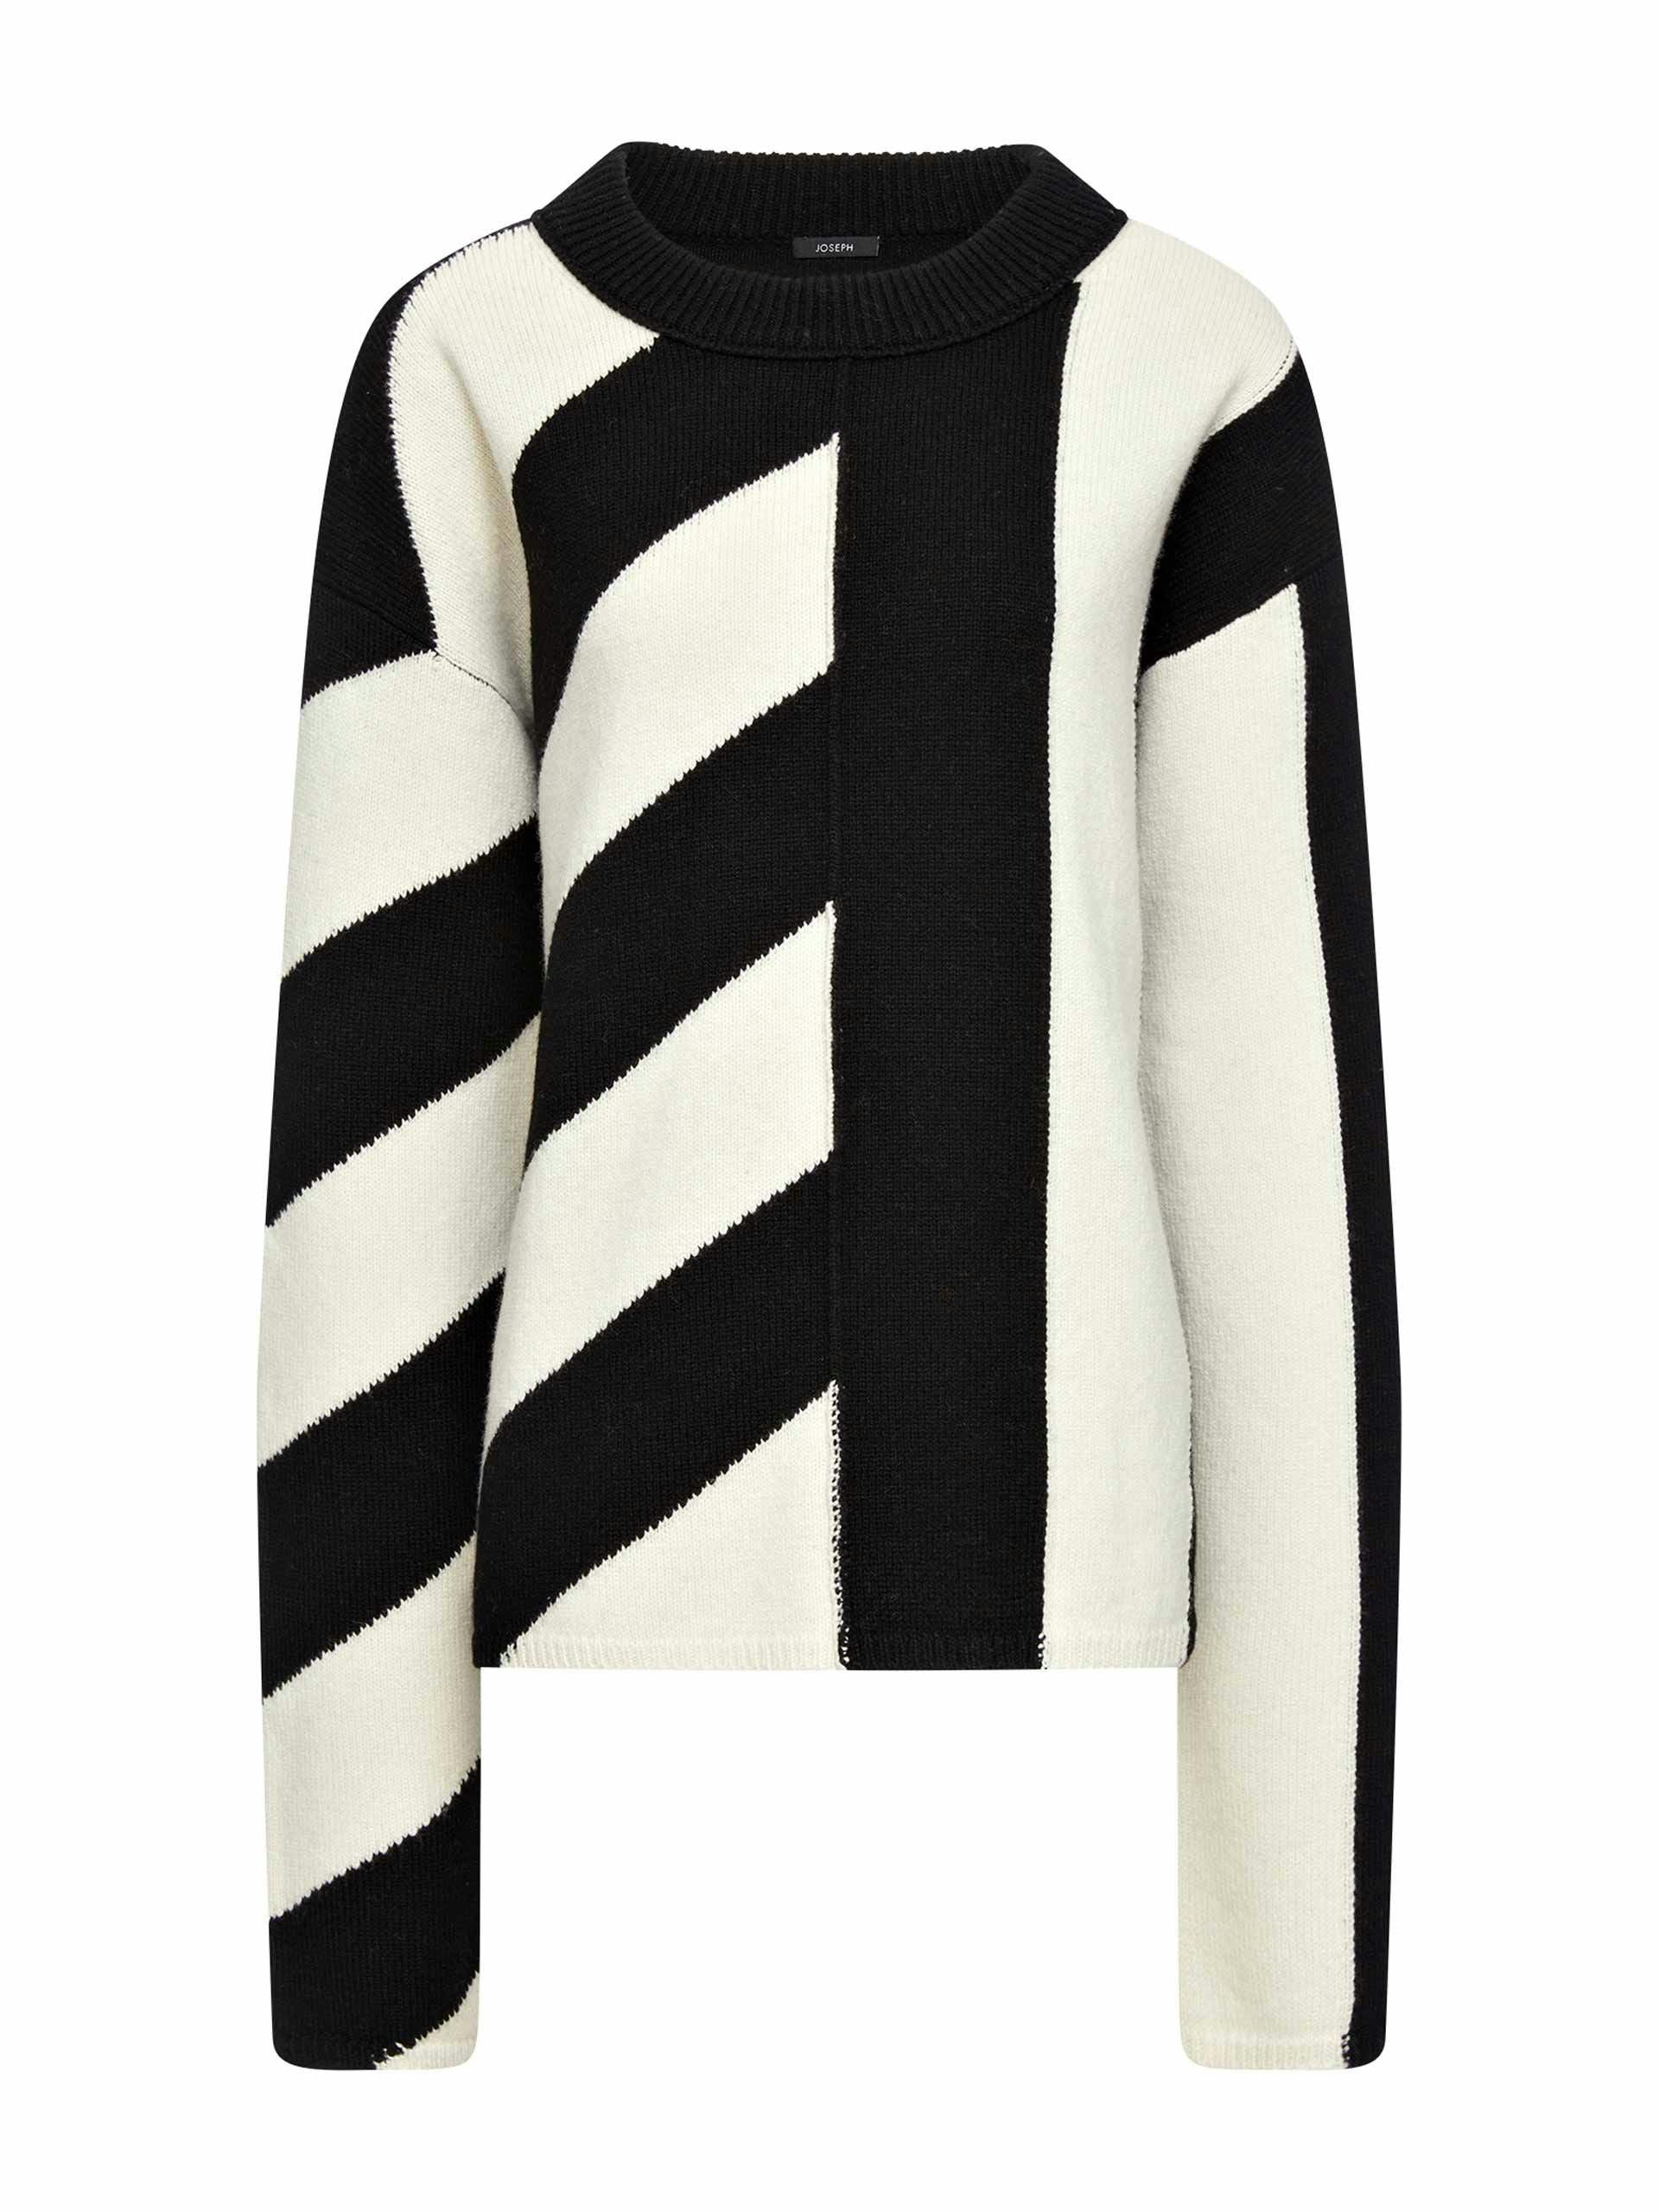 Graphic knit jumper